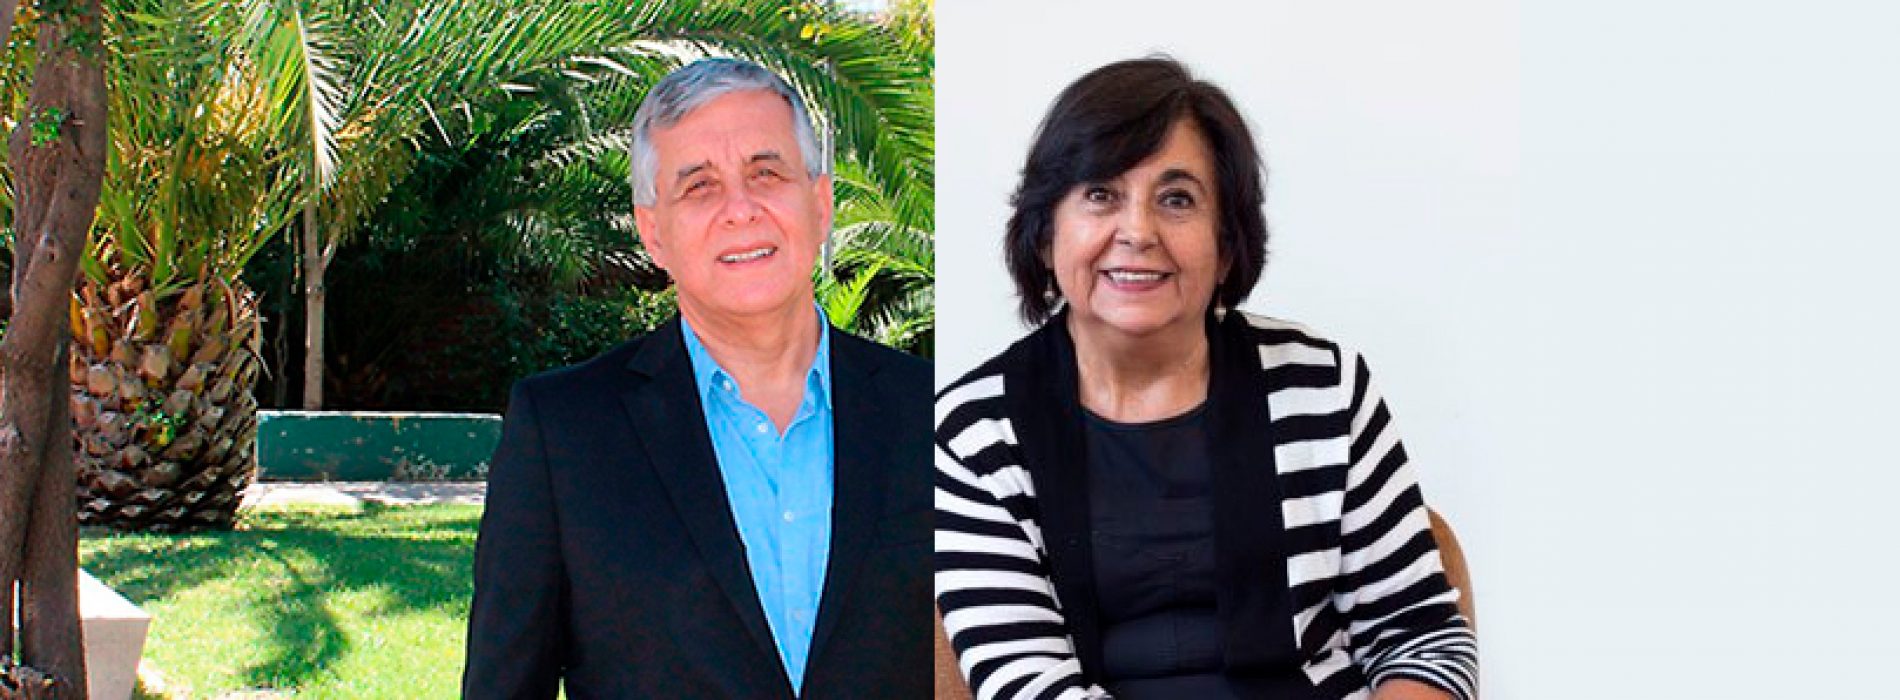 Our partners Cecilia Hidalgo and Sergio Lavandero (Former President) are unanimously elected as President and Vice-President of the Chilean Academy of Sciences of the Institute of Chile